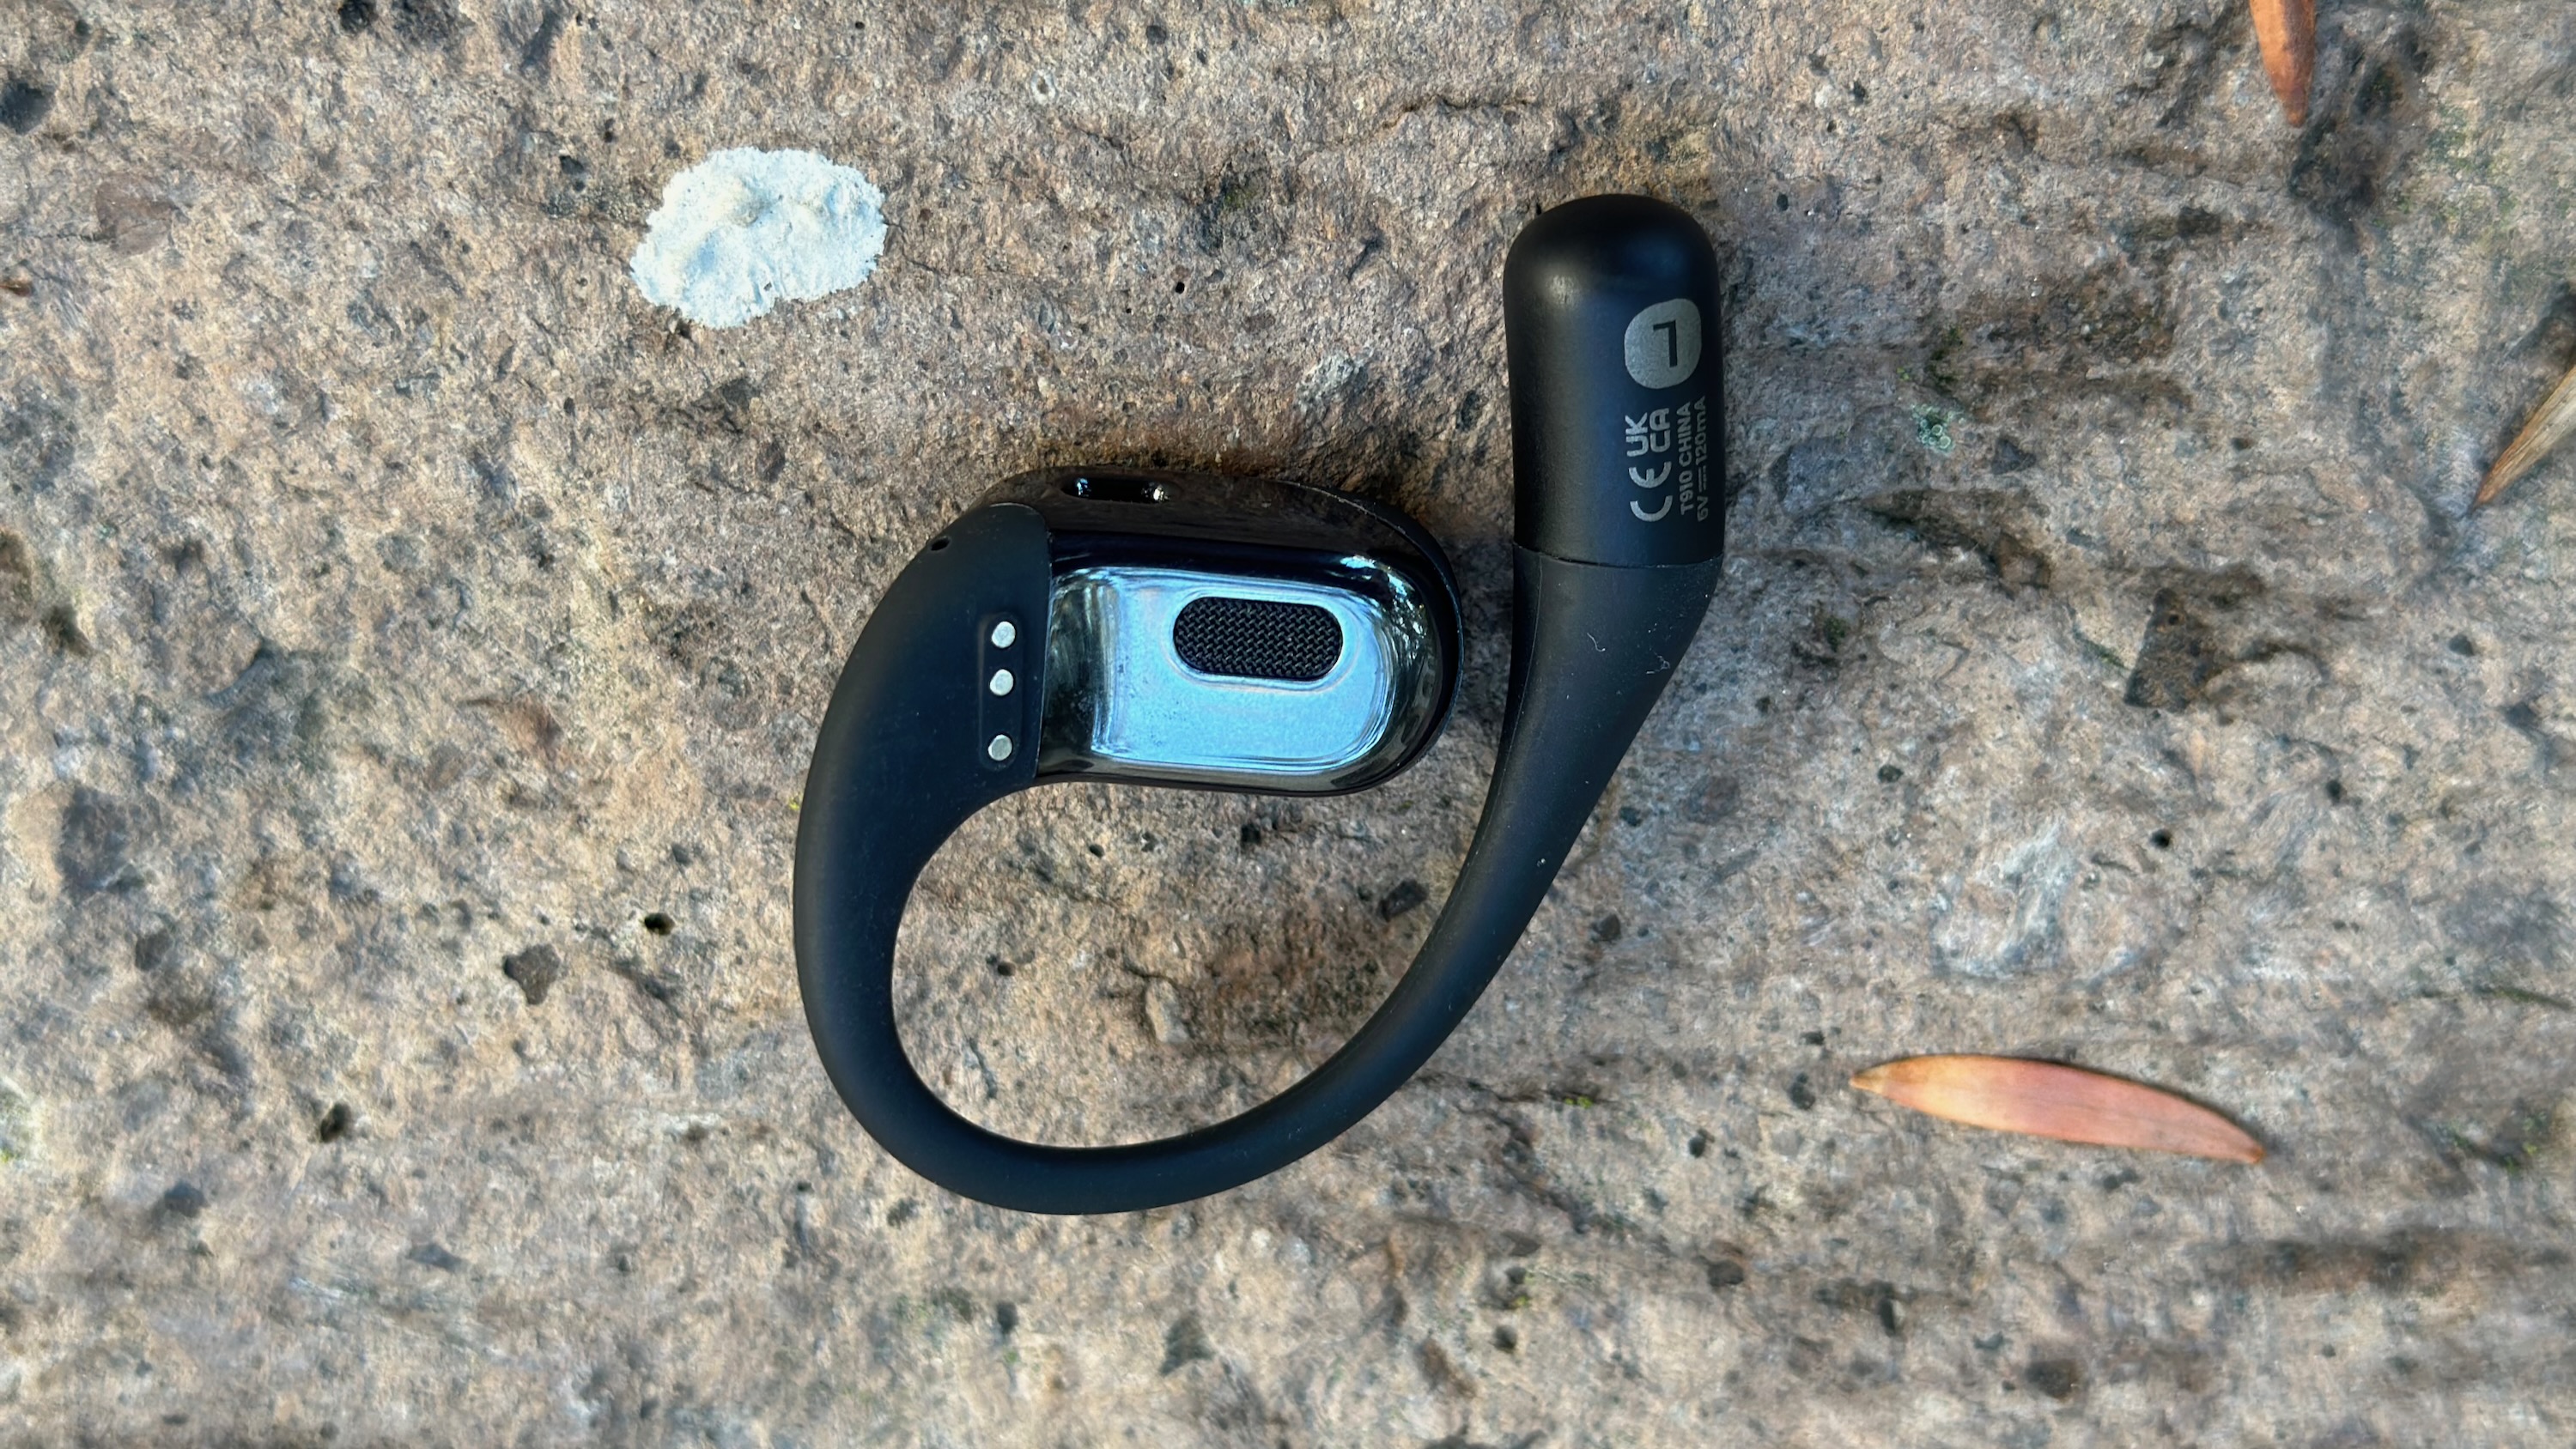 A rear view of the Shokz OpenFit showing the speaker grill